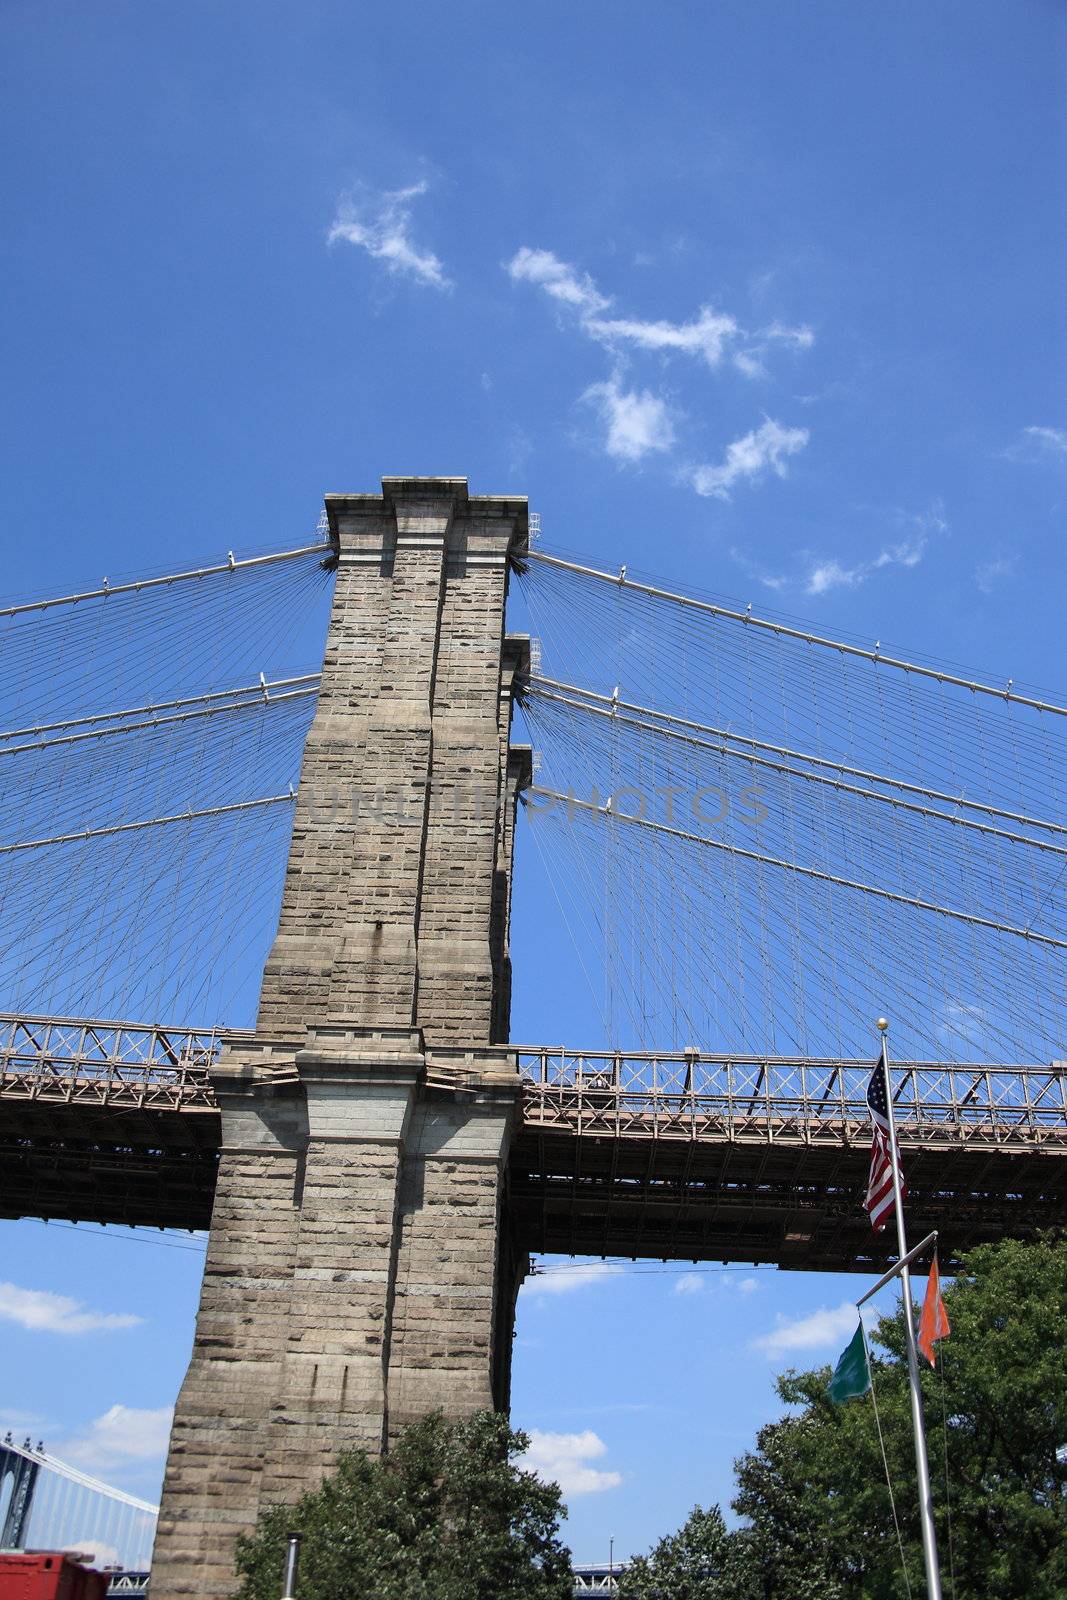 Brooklyn Bridge Arch and steel cables